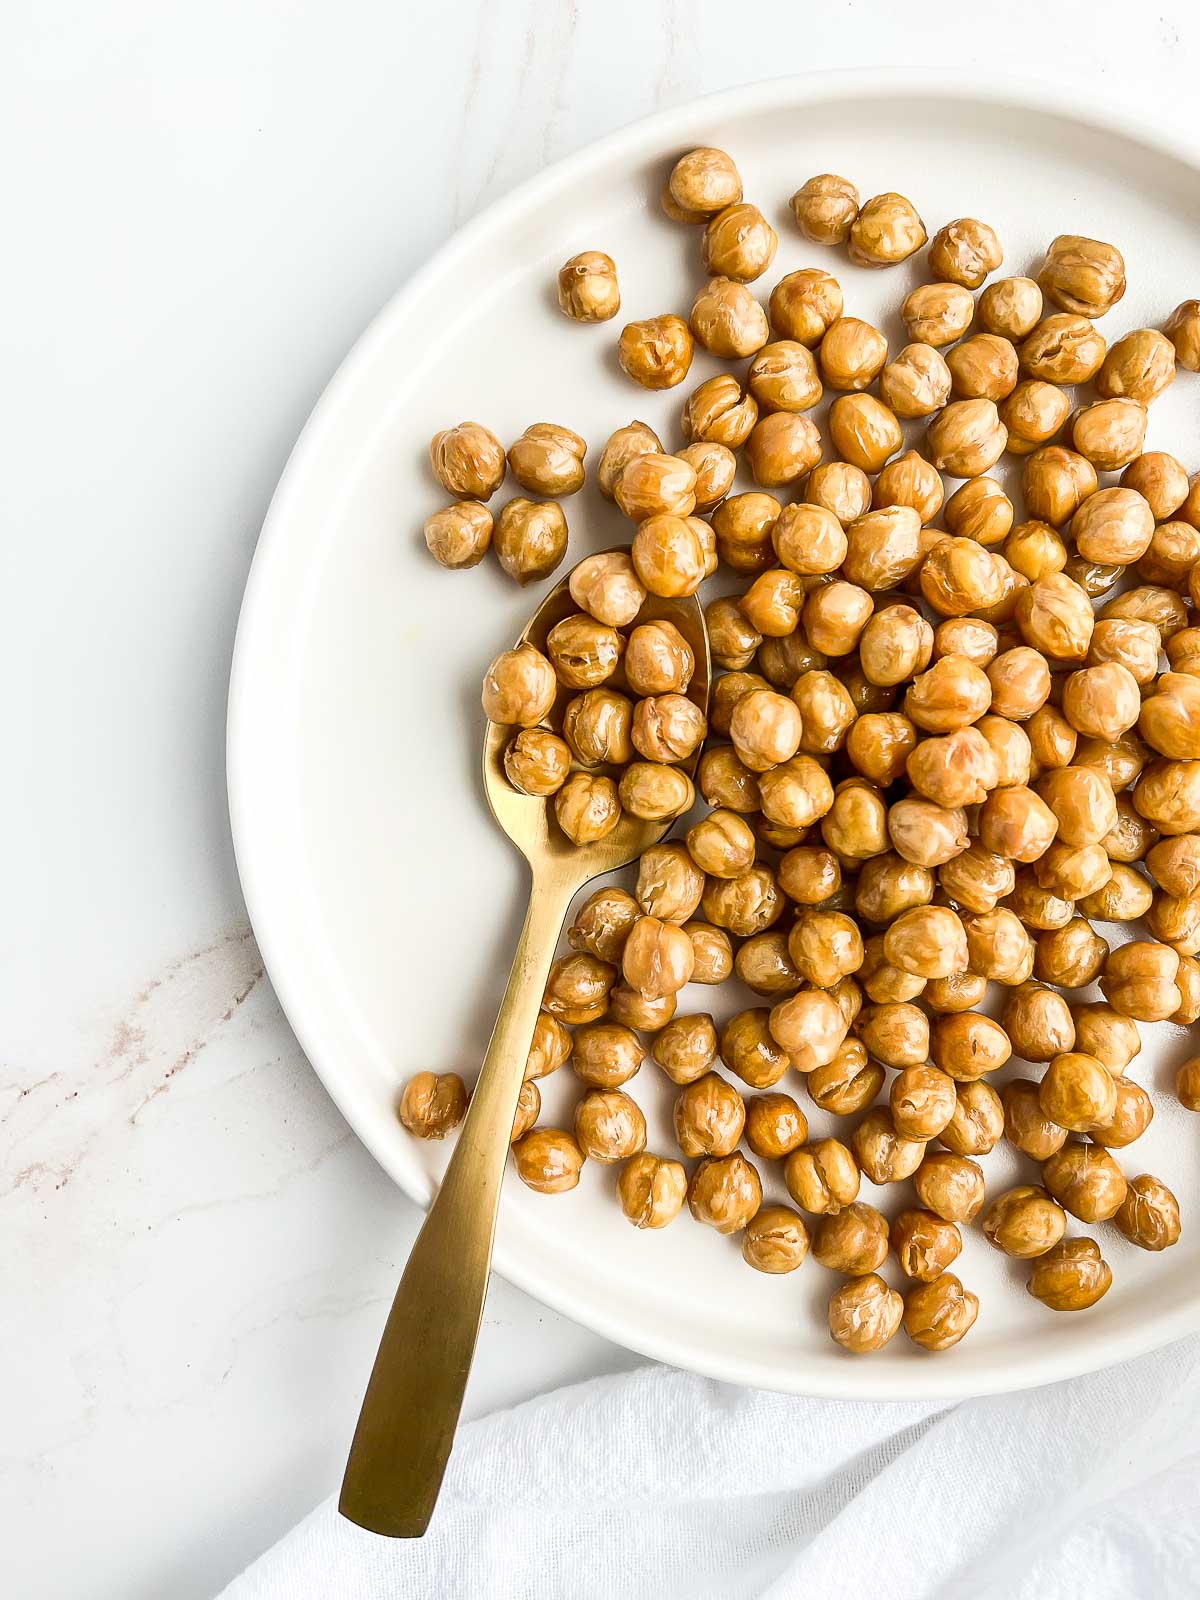 Plate of roasted chickpeas with a gold spoon.